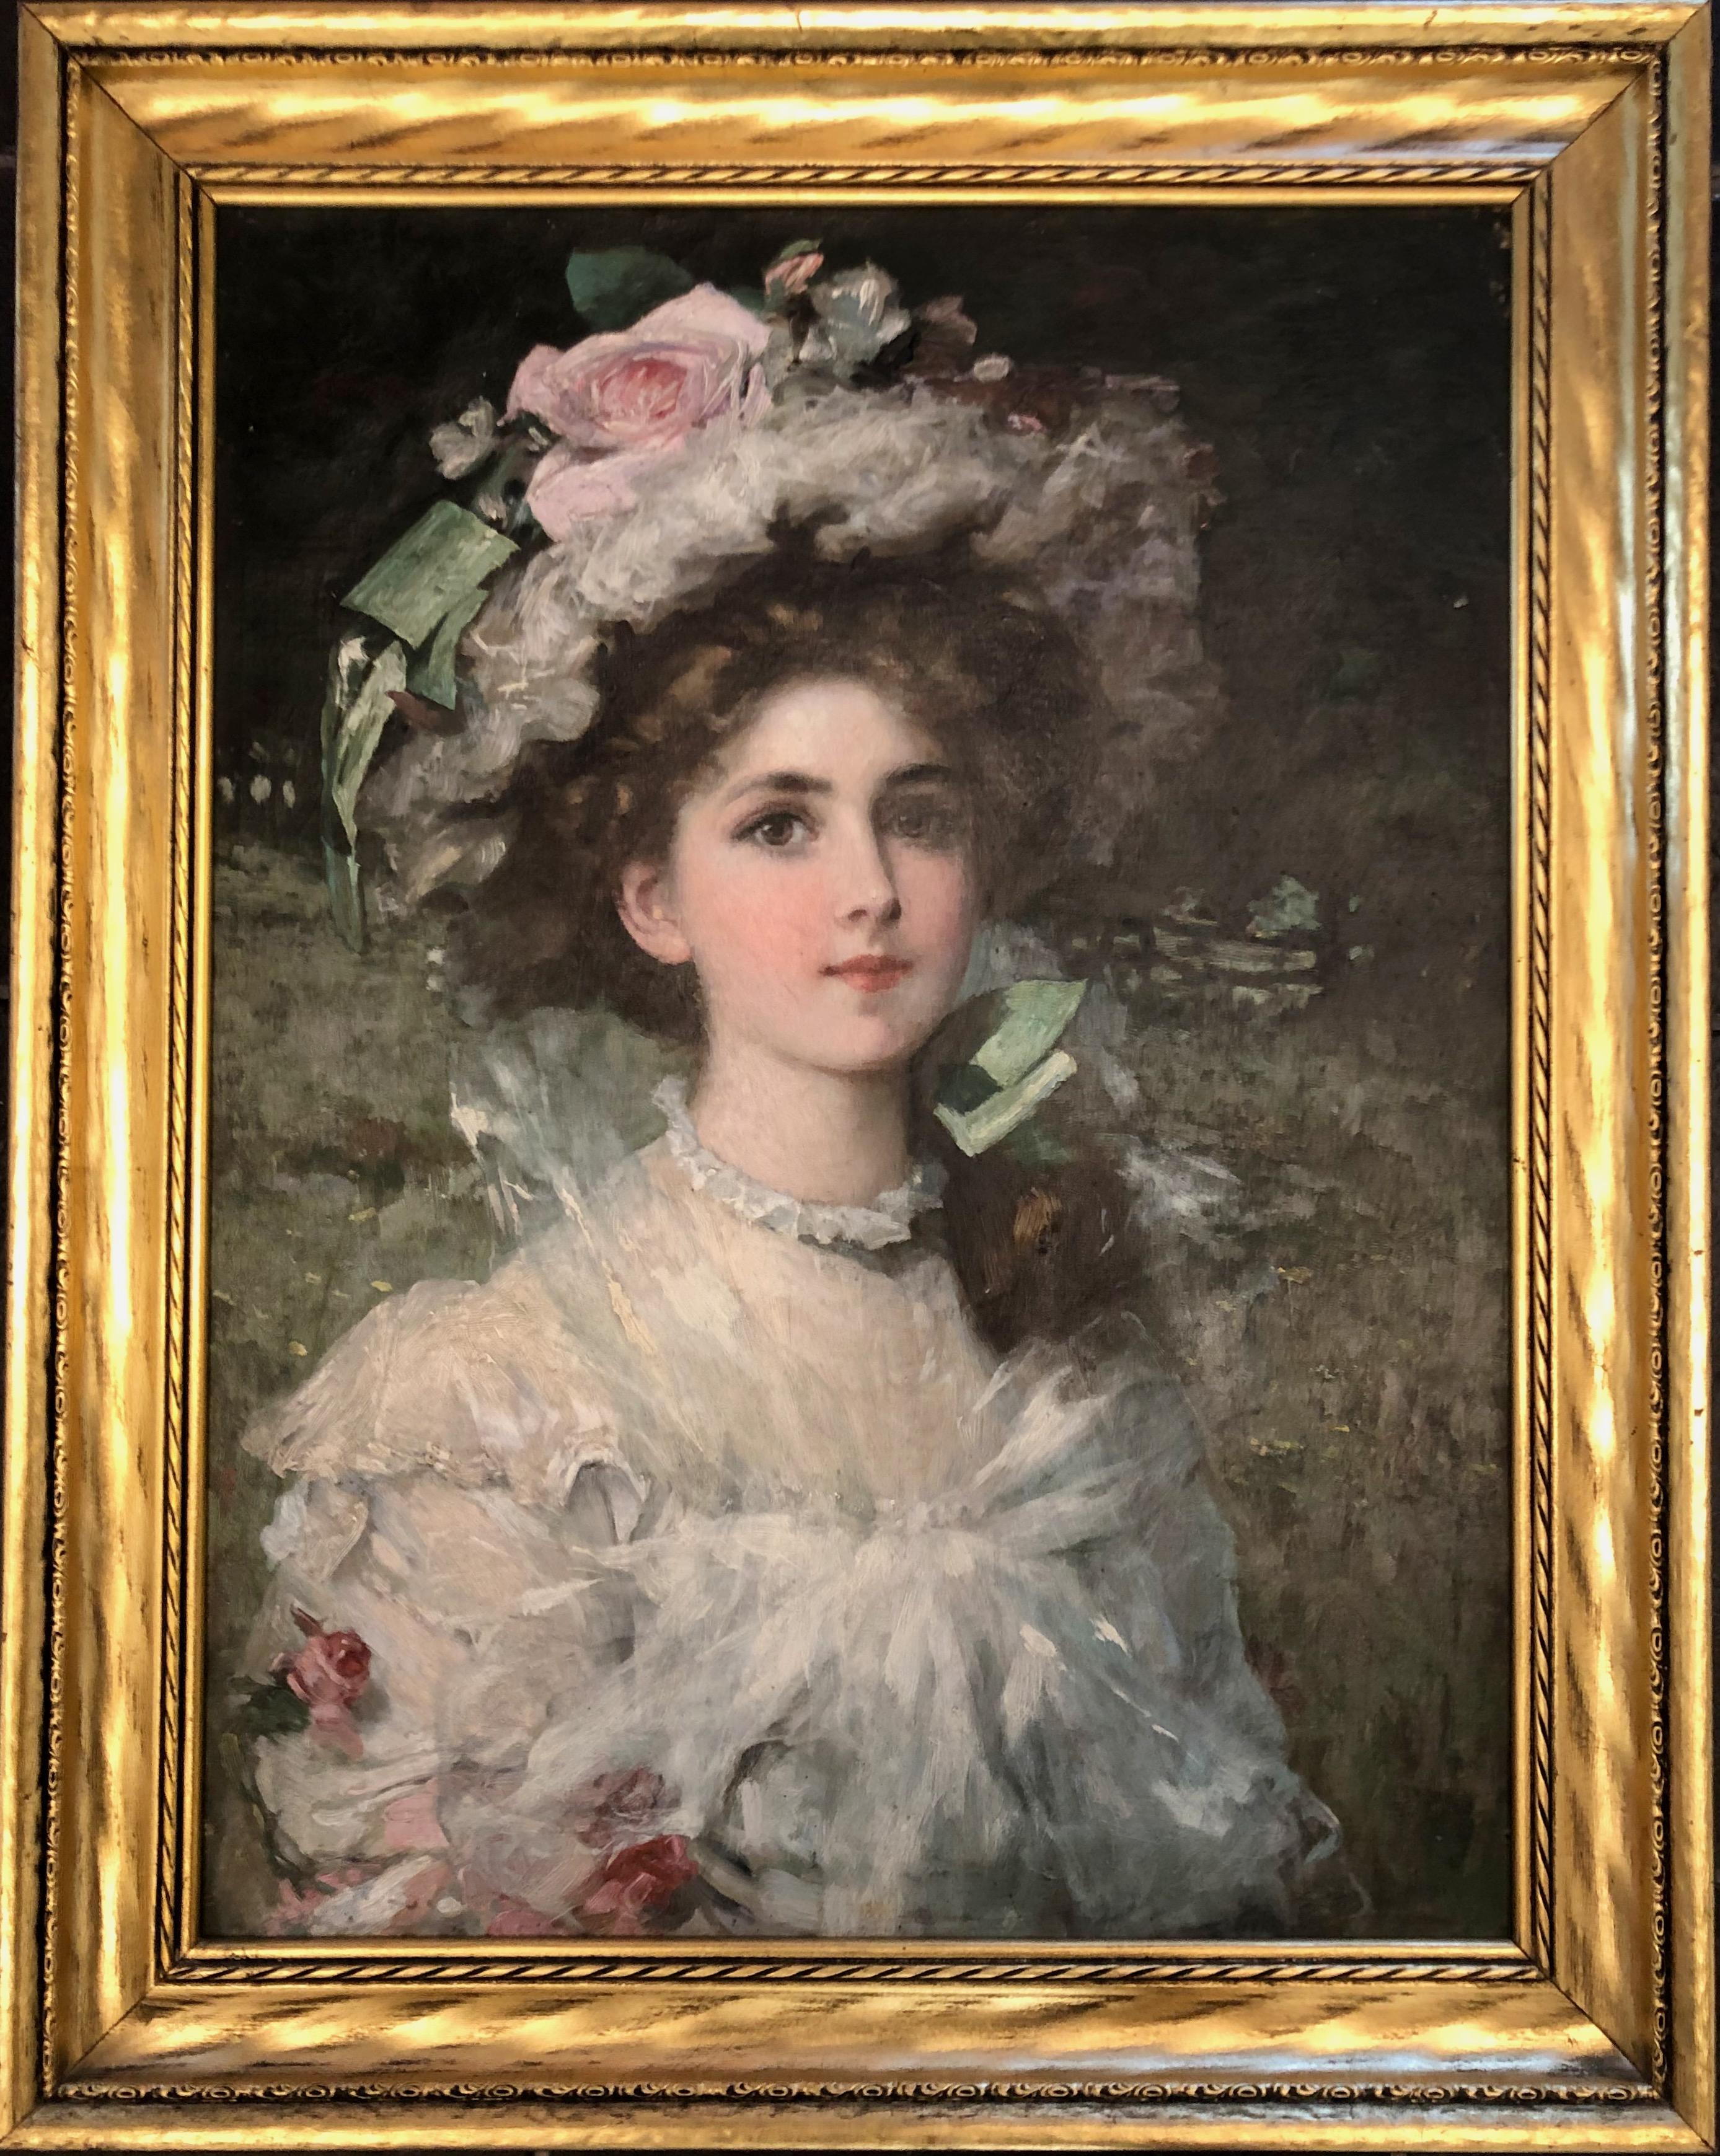  Portrait Of A Young Lady In The Landscape.
Portrait depicting a beautiful young woman in the landscape dressed in a tulle dress and hat decorated with pink roses.
The painting is in original very good condition, signed upper left corner.
An